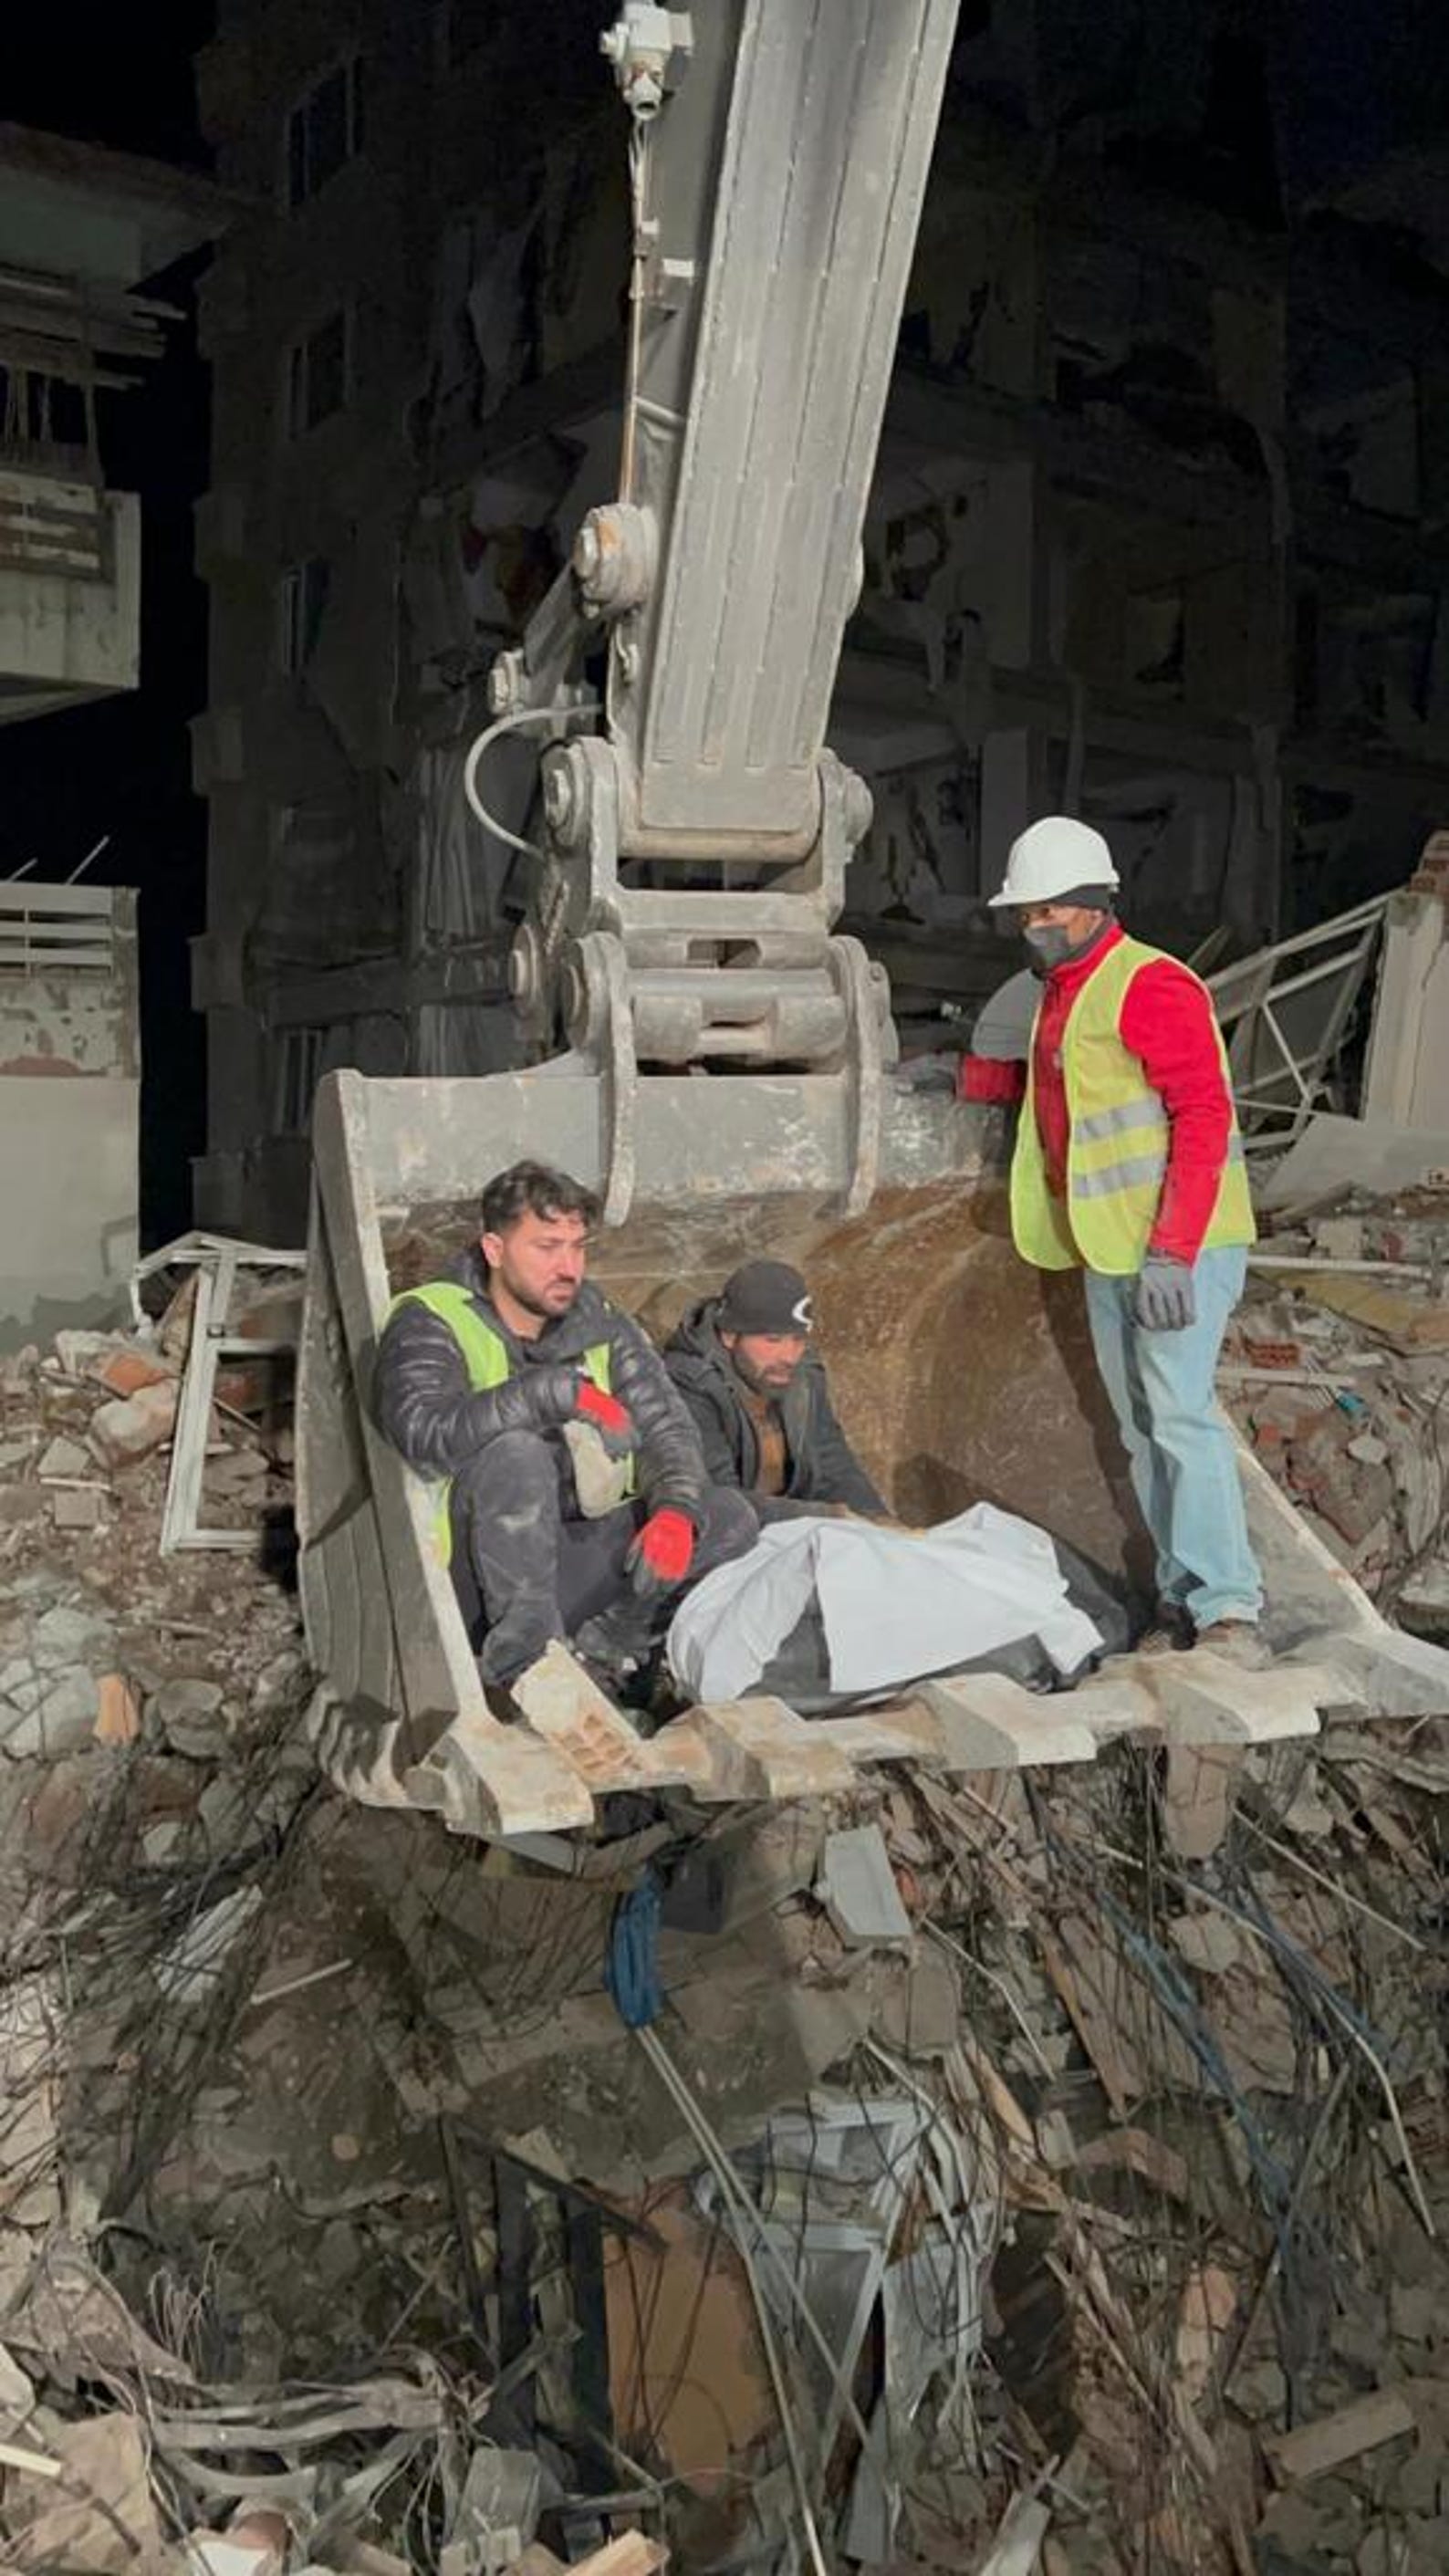 Rescue worker Salam Aldeen, left, rides in excavator bucket with a body recovered from the rubble of the earthquakes in Turkey in Antakya in this undated photo.